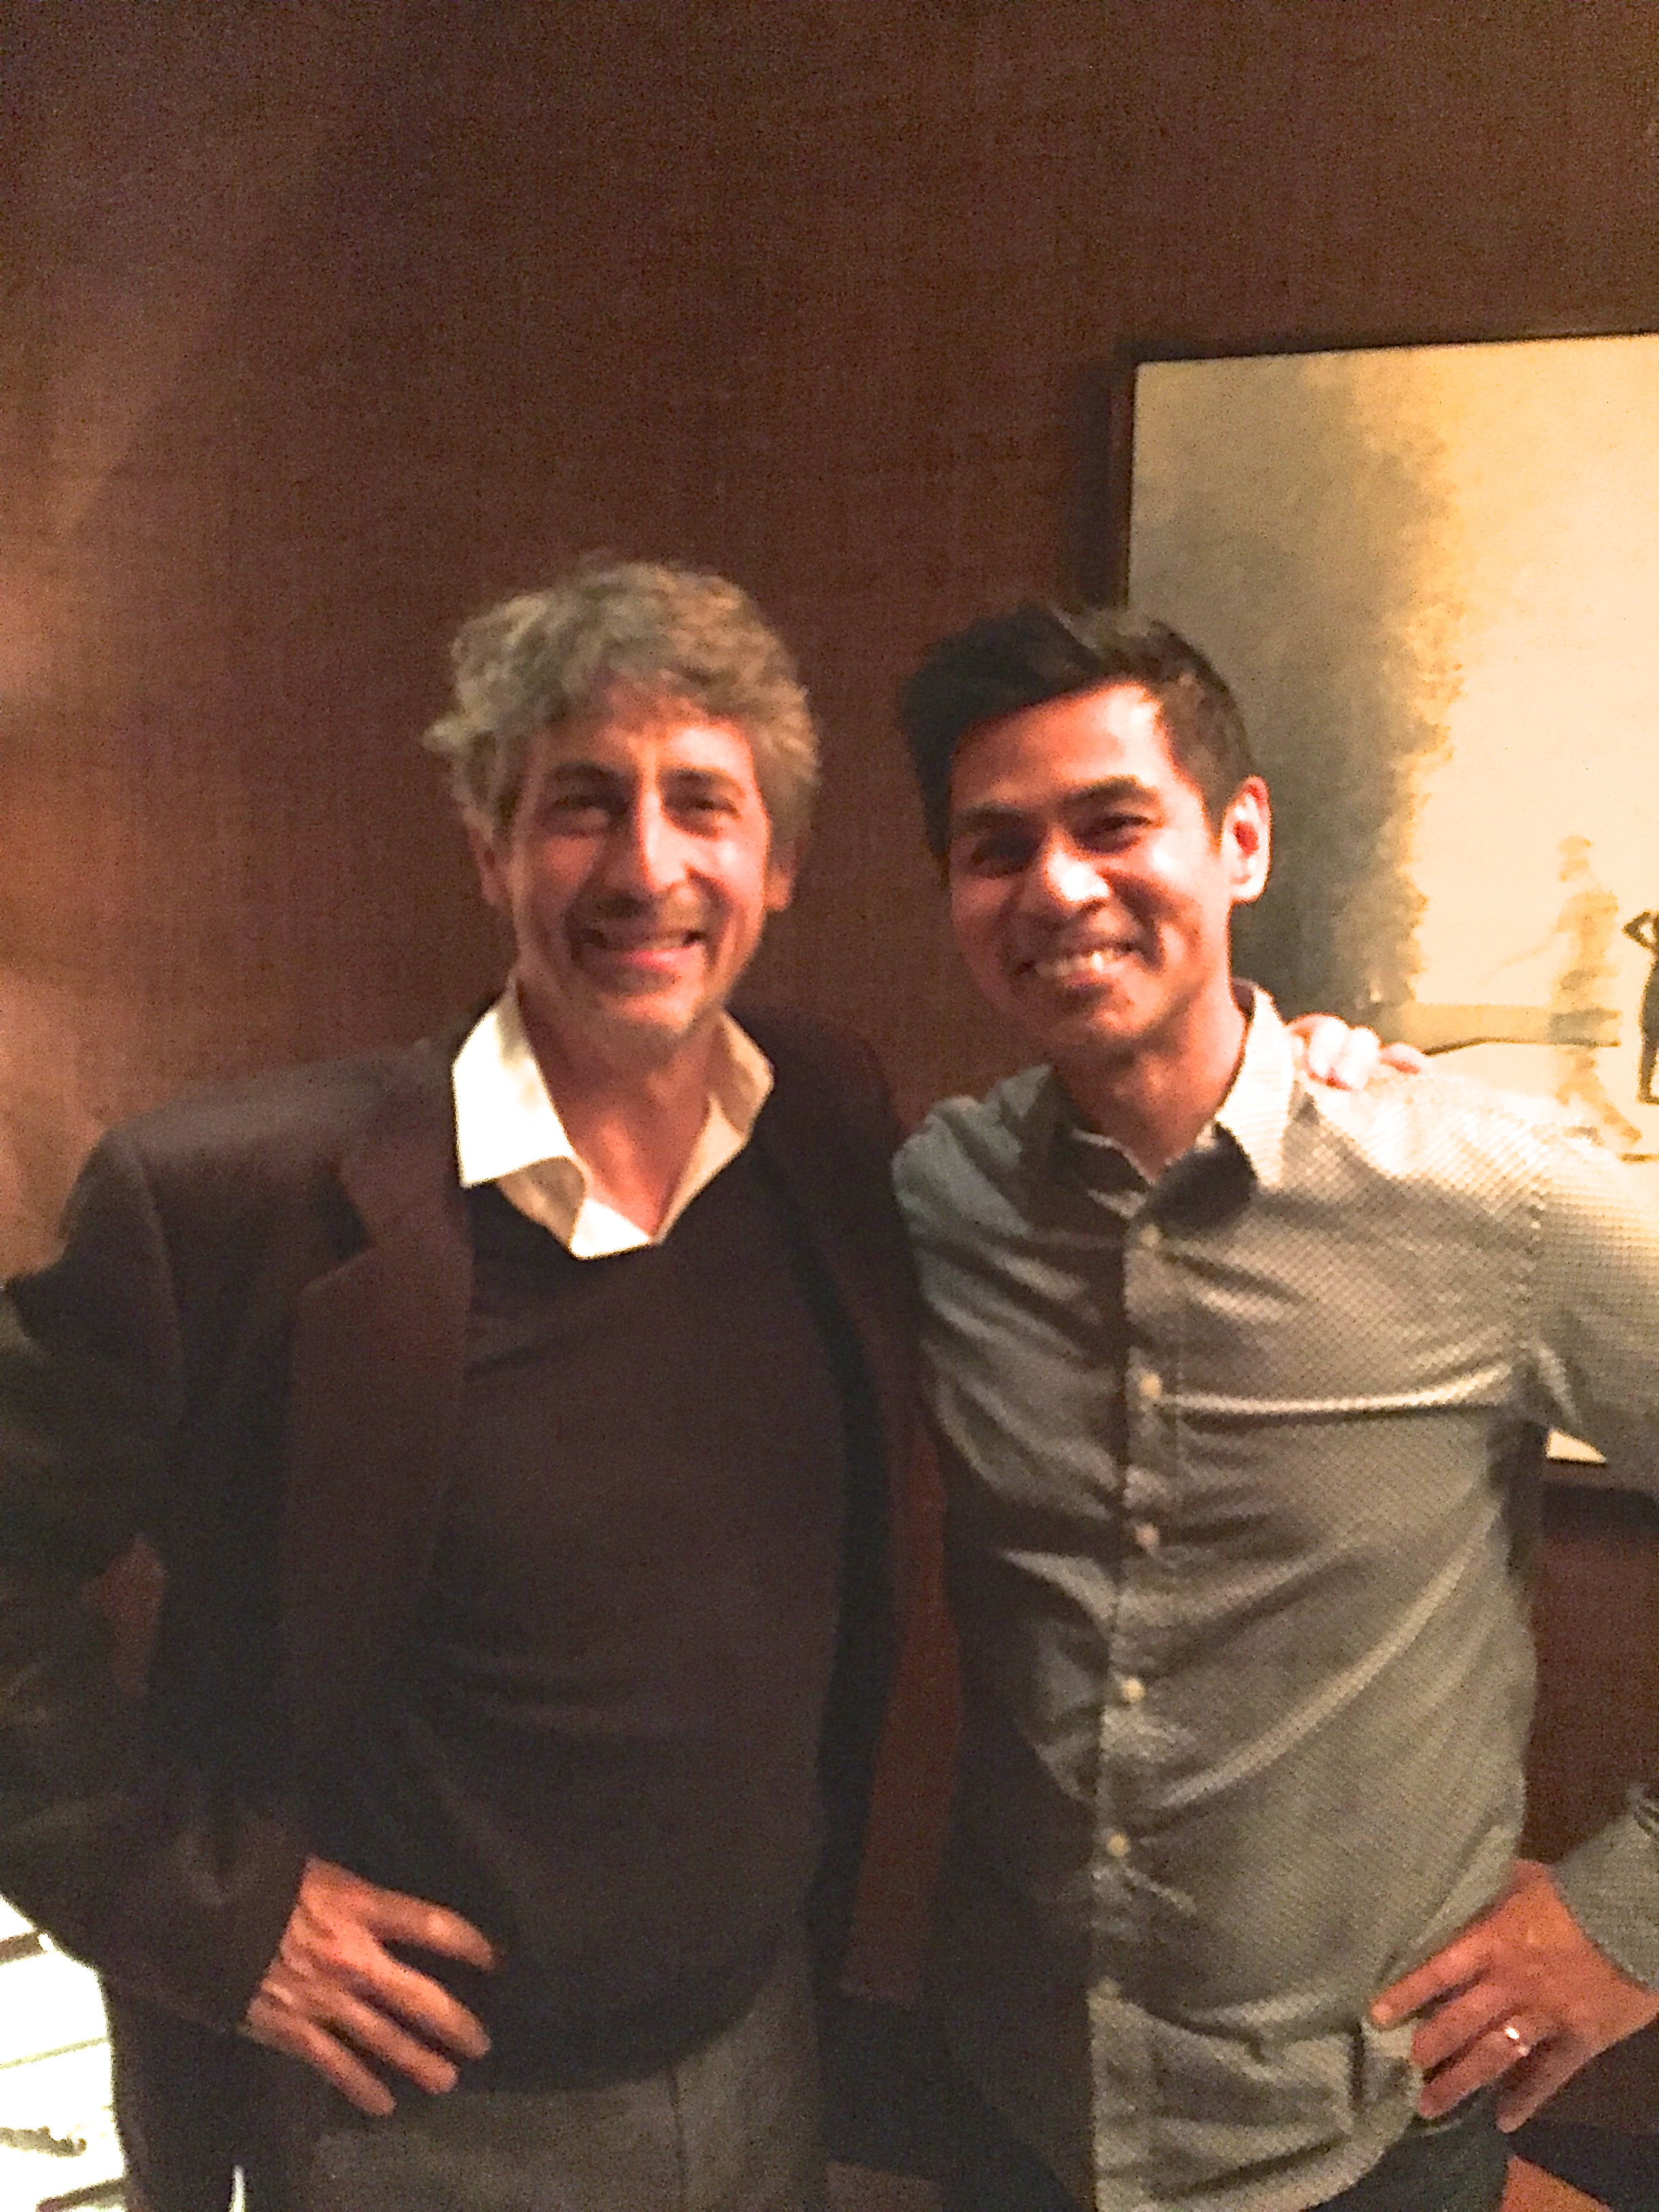 Two time Academy Award winner writer and director Alexander Payne